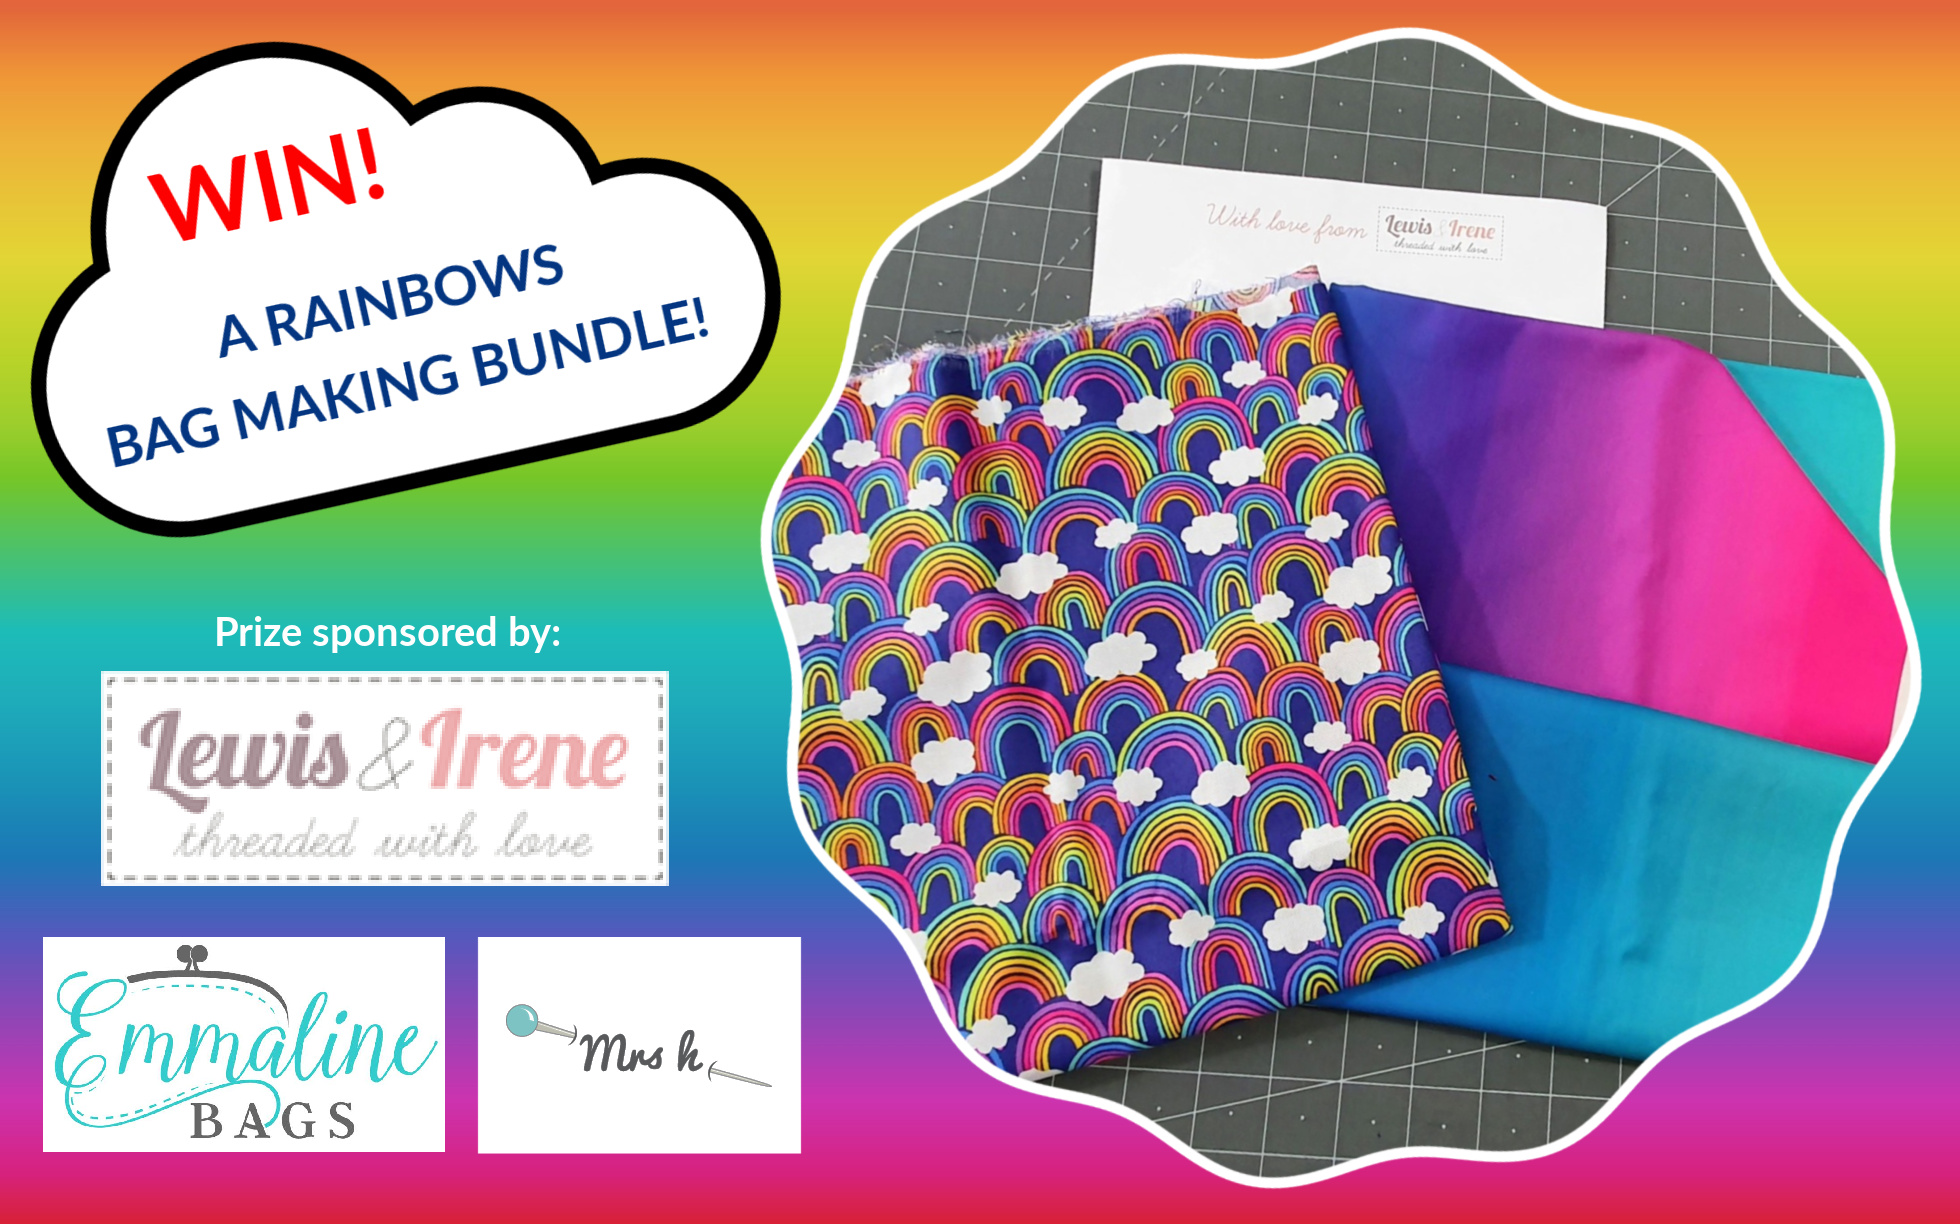 Win Rainbows fabric from Lewis & Irene, patterns from Mrs H, and hardware from Emmaline Bags